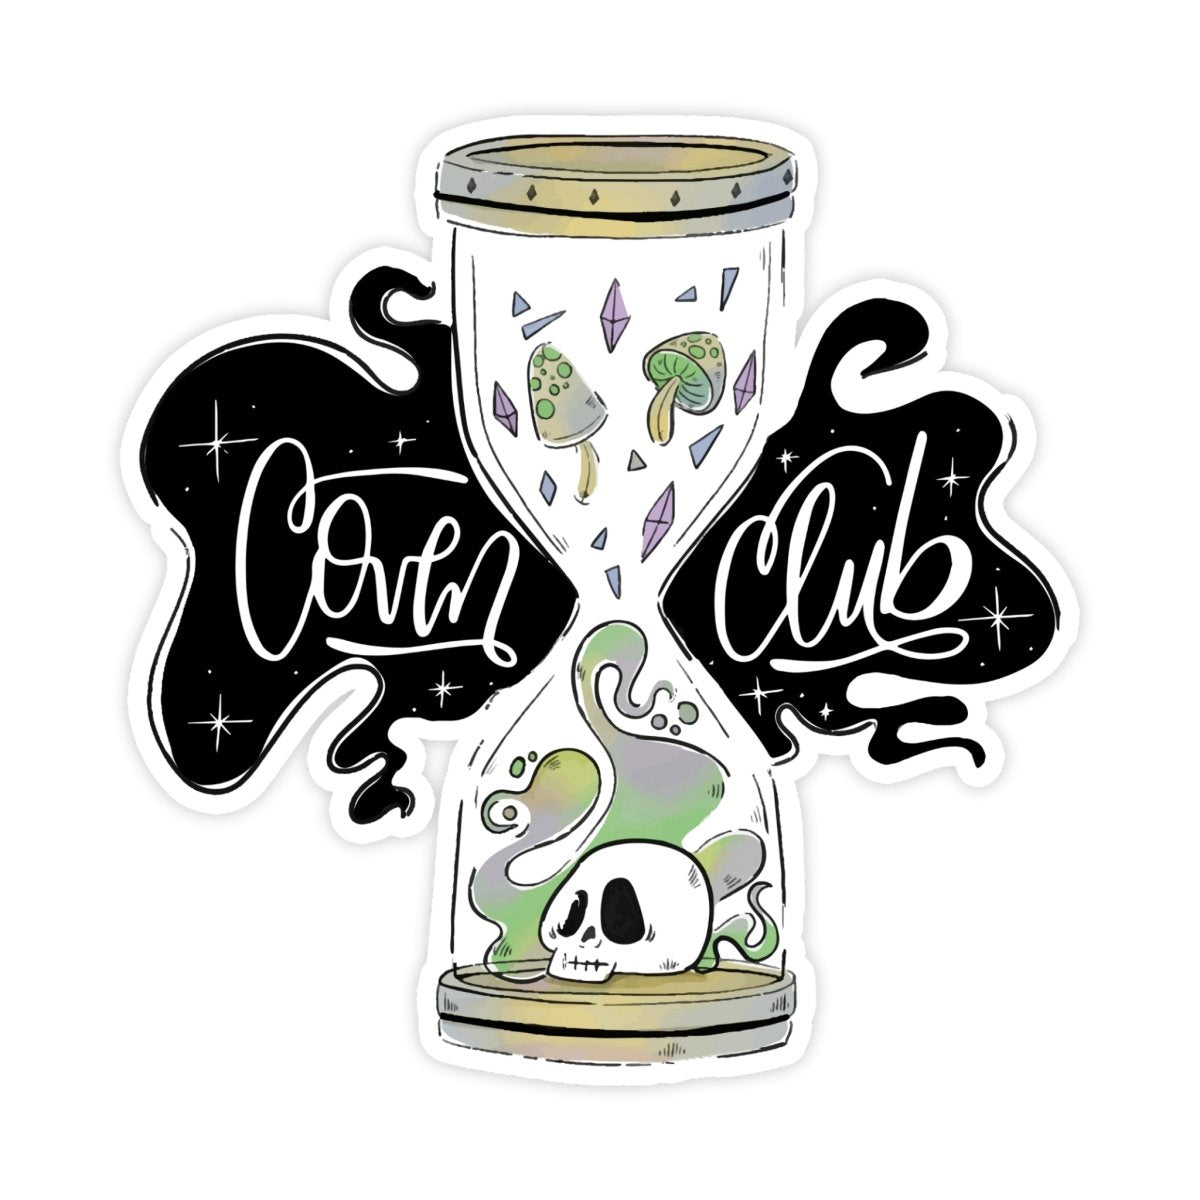 Coven Club Occult Witch Sticker - stickerbullCoven Club Occult Witch StickerRetail StickerstickerbullstickerbullCoven Club Occult Witch Sticker